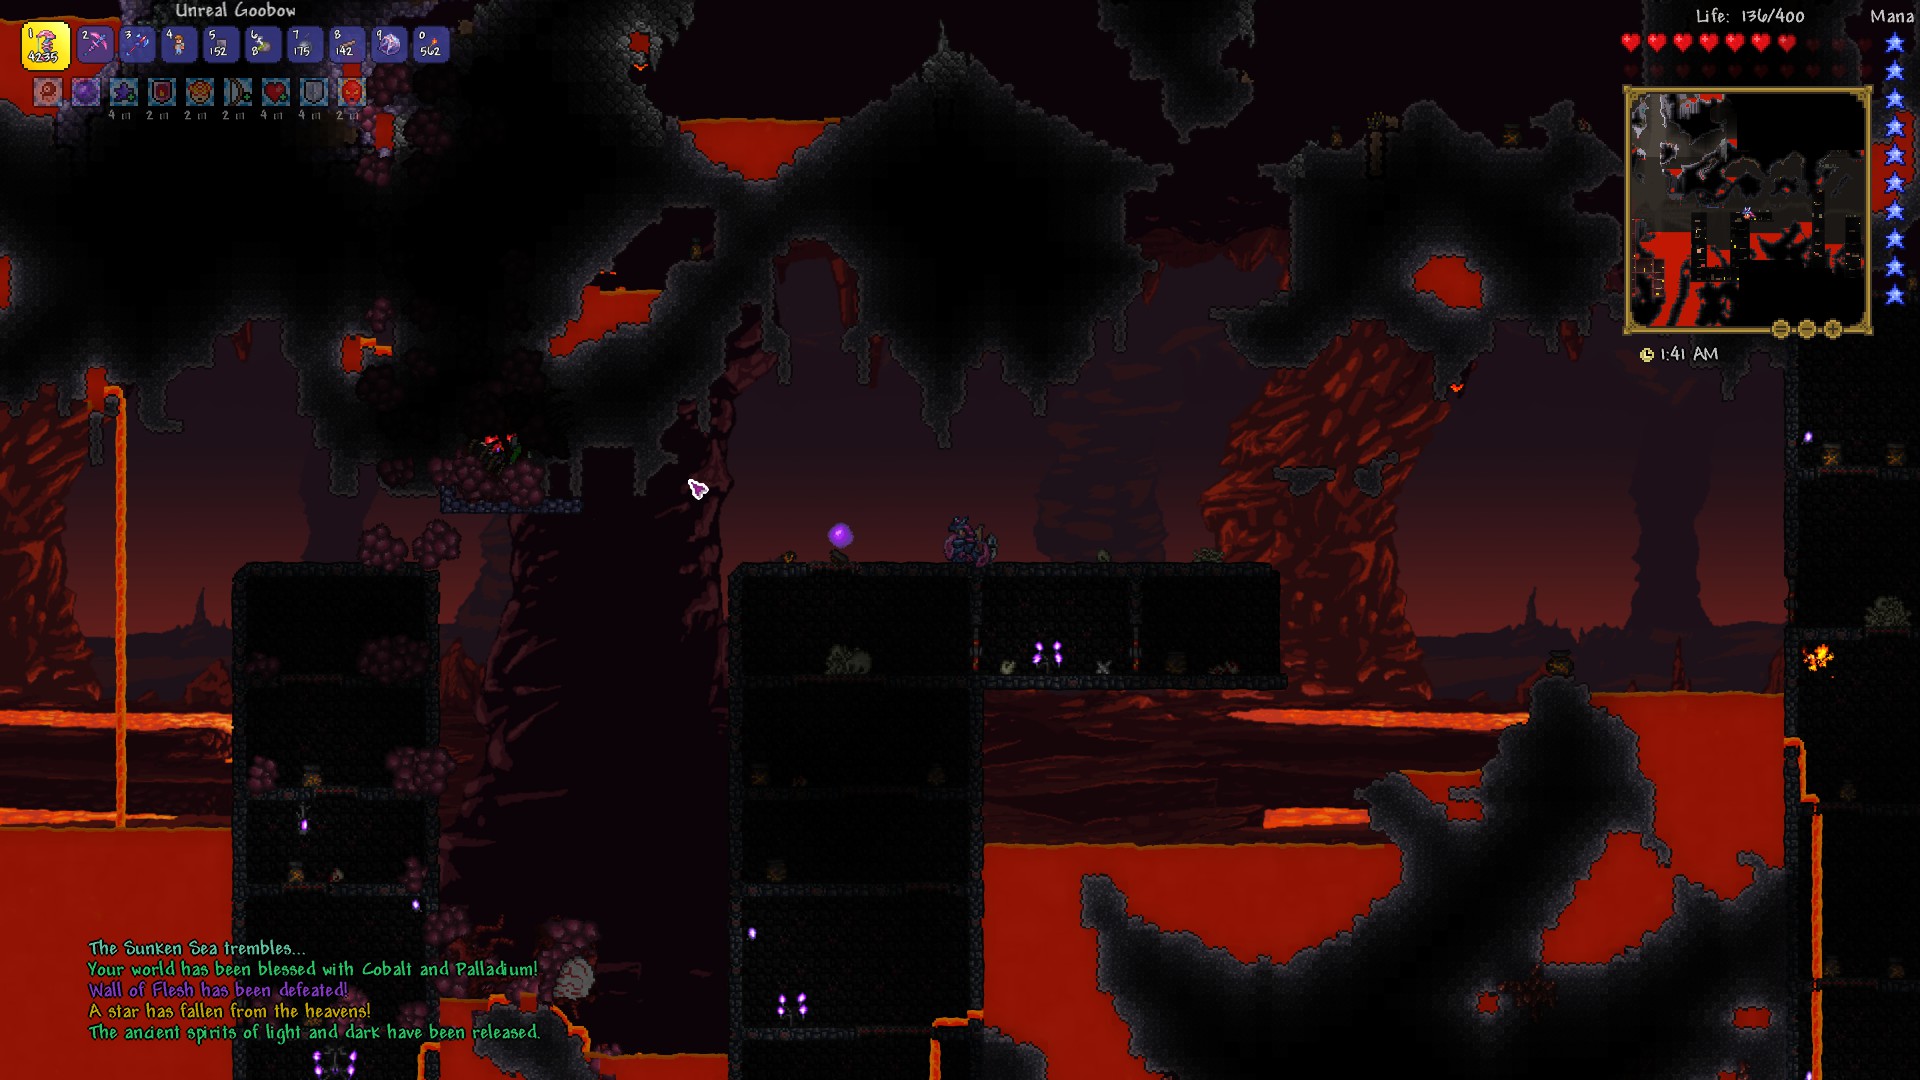 Im going to play terraria calamity for the first time - Pixel Pub